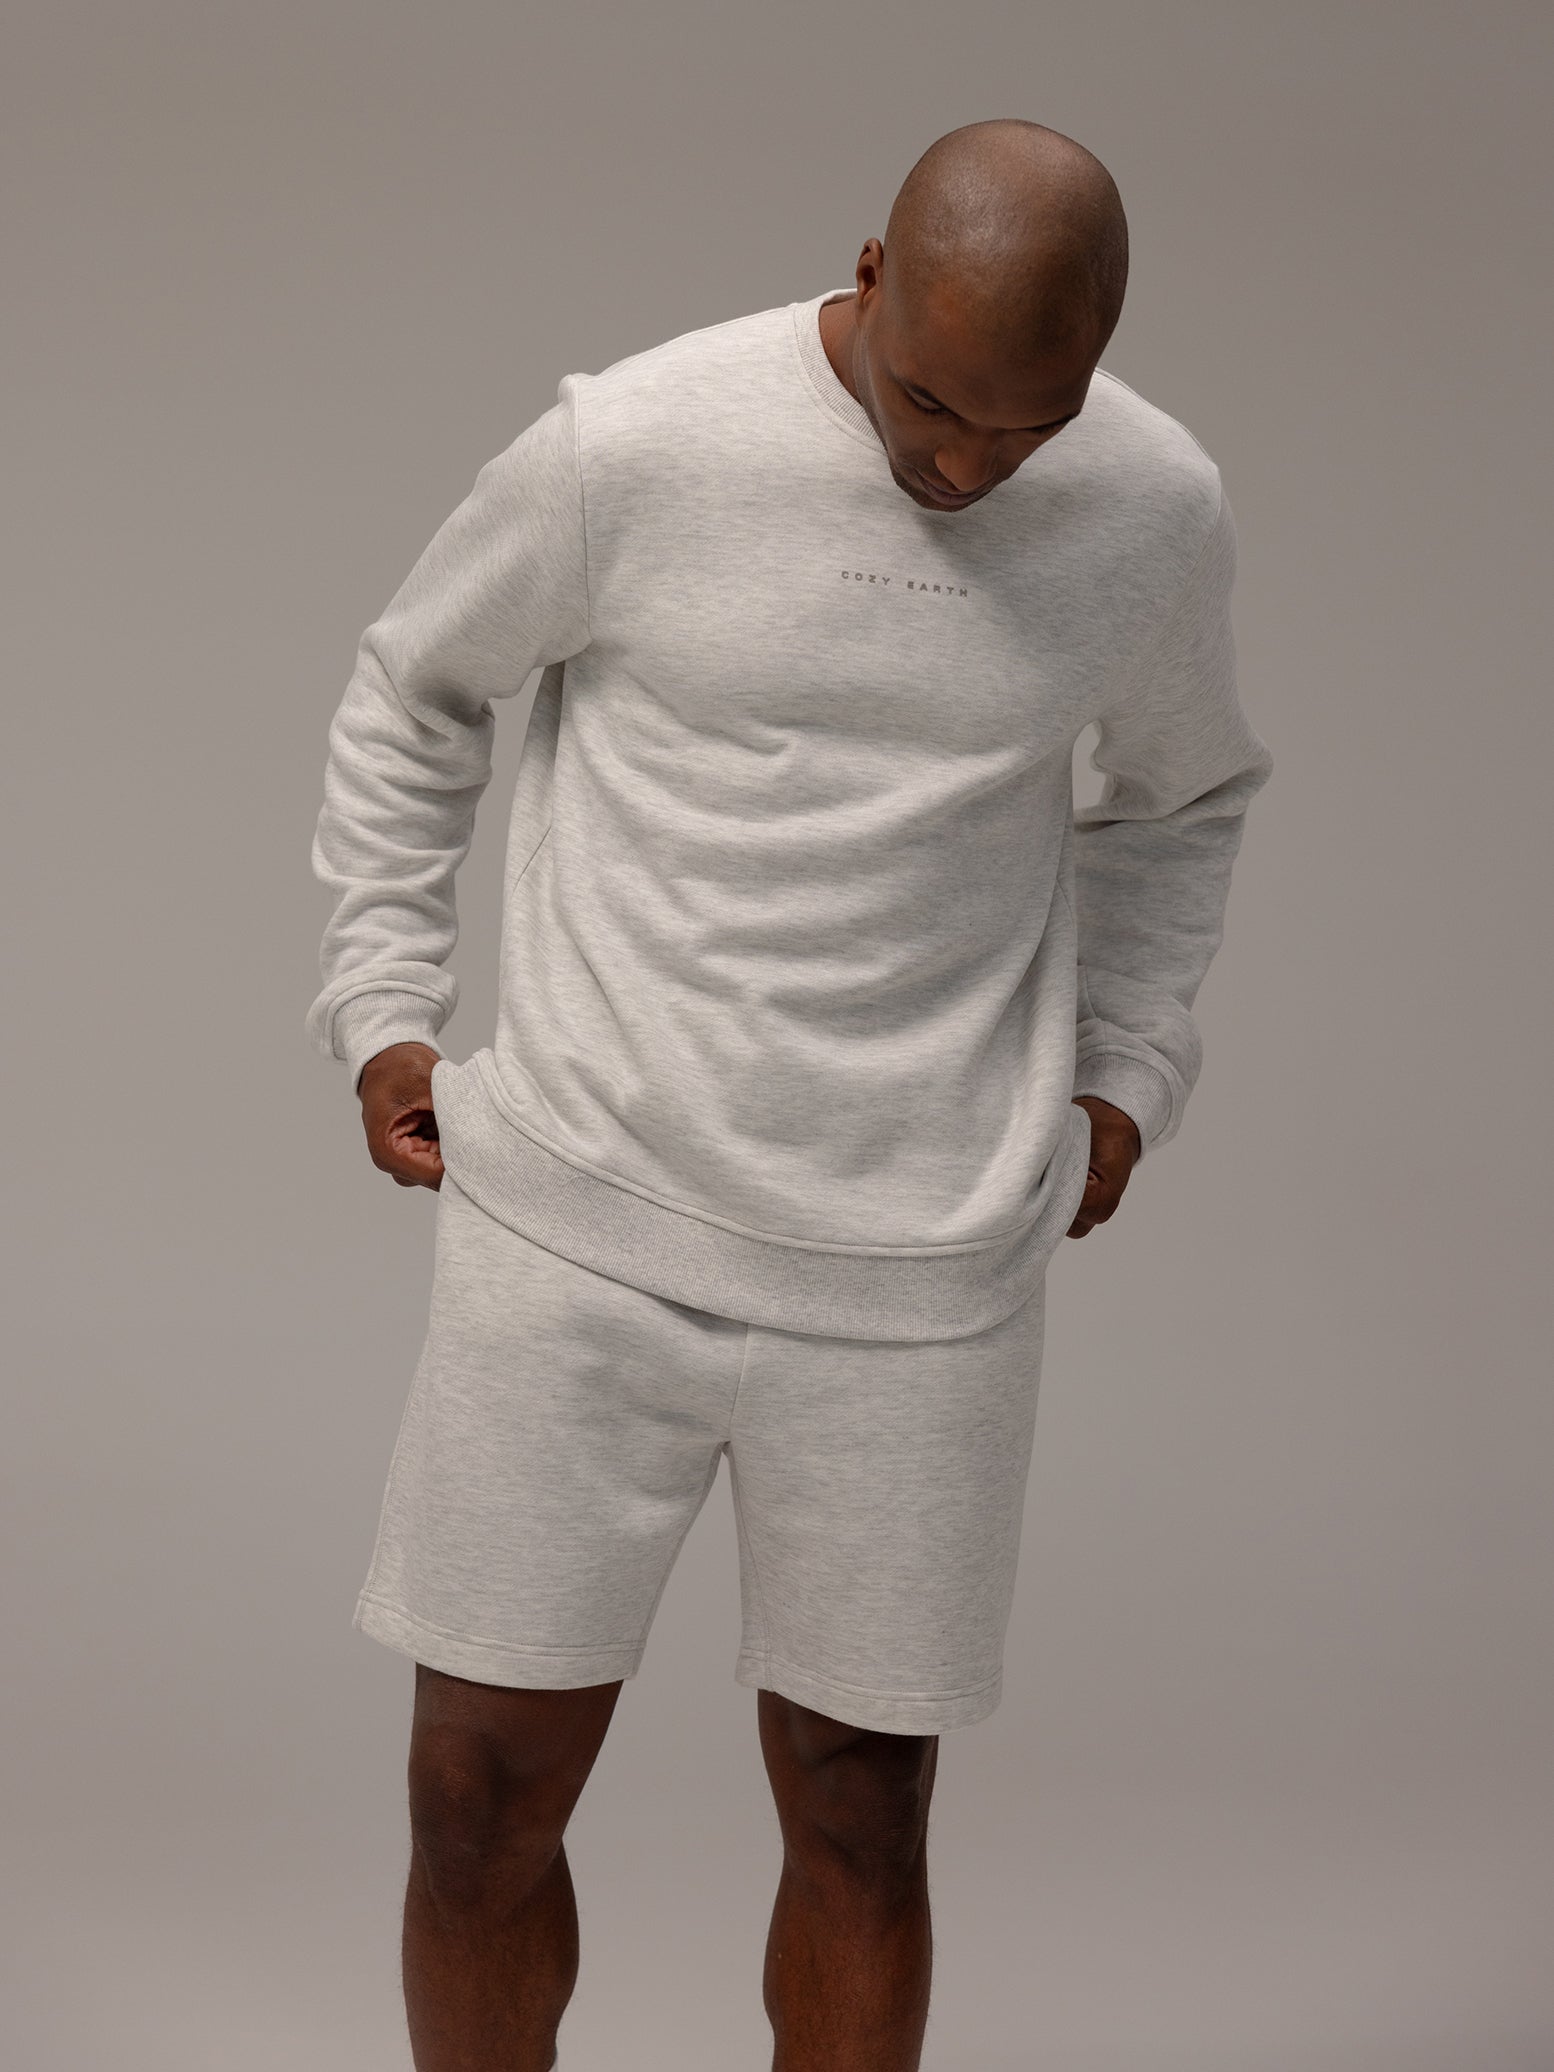 Man wearing heather grey cityscape pullover and shorts with gray background 